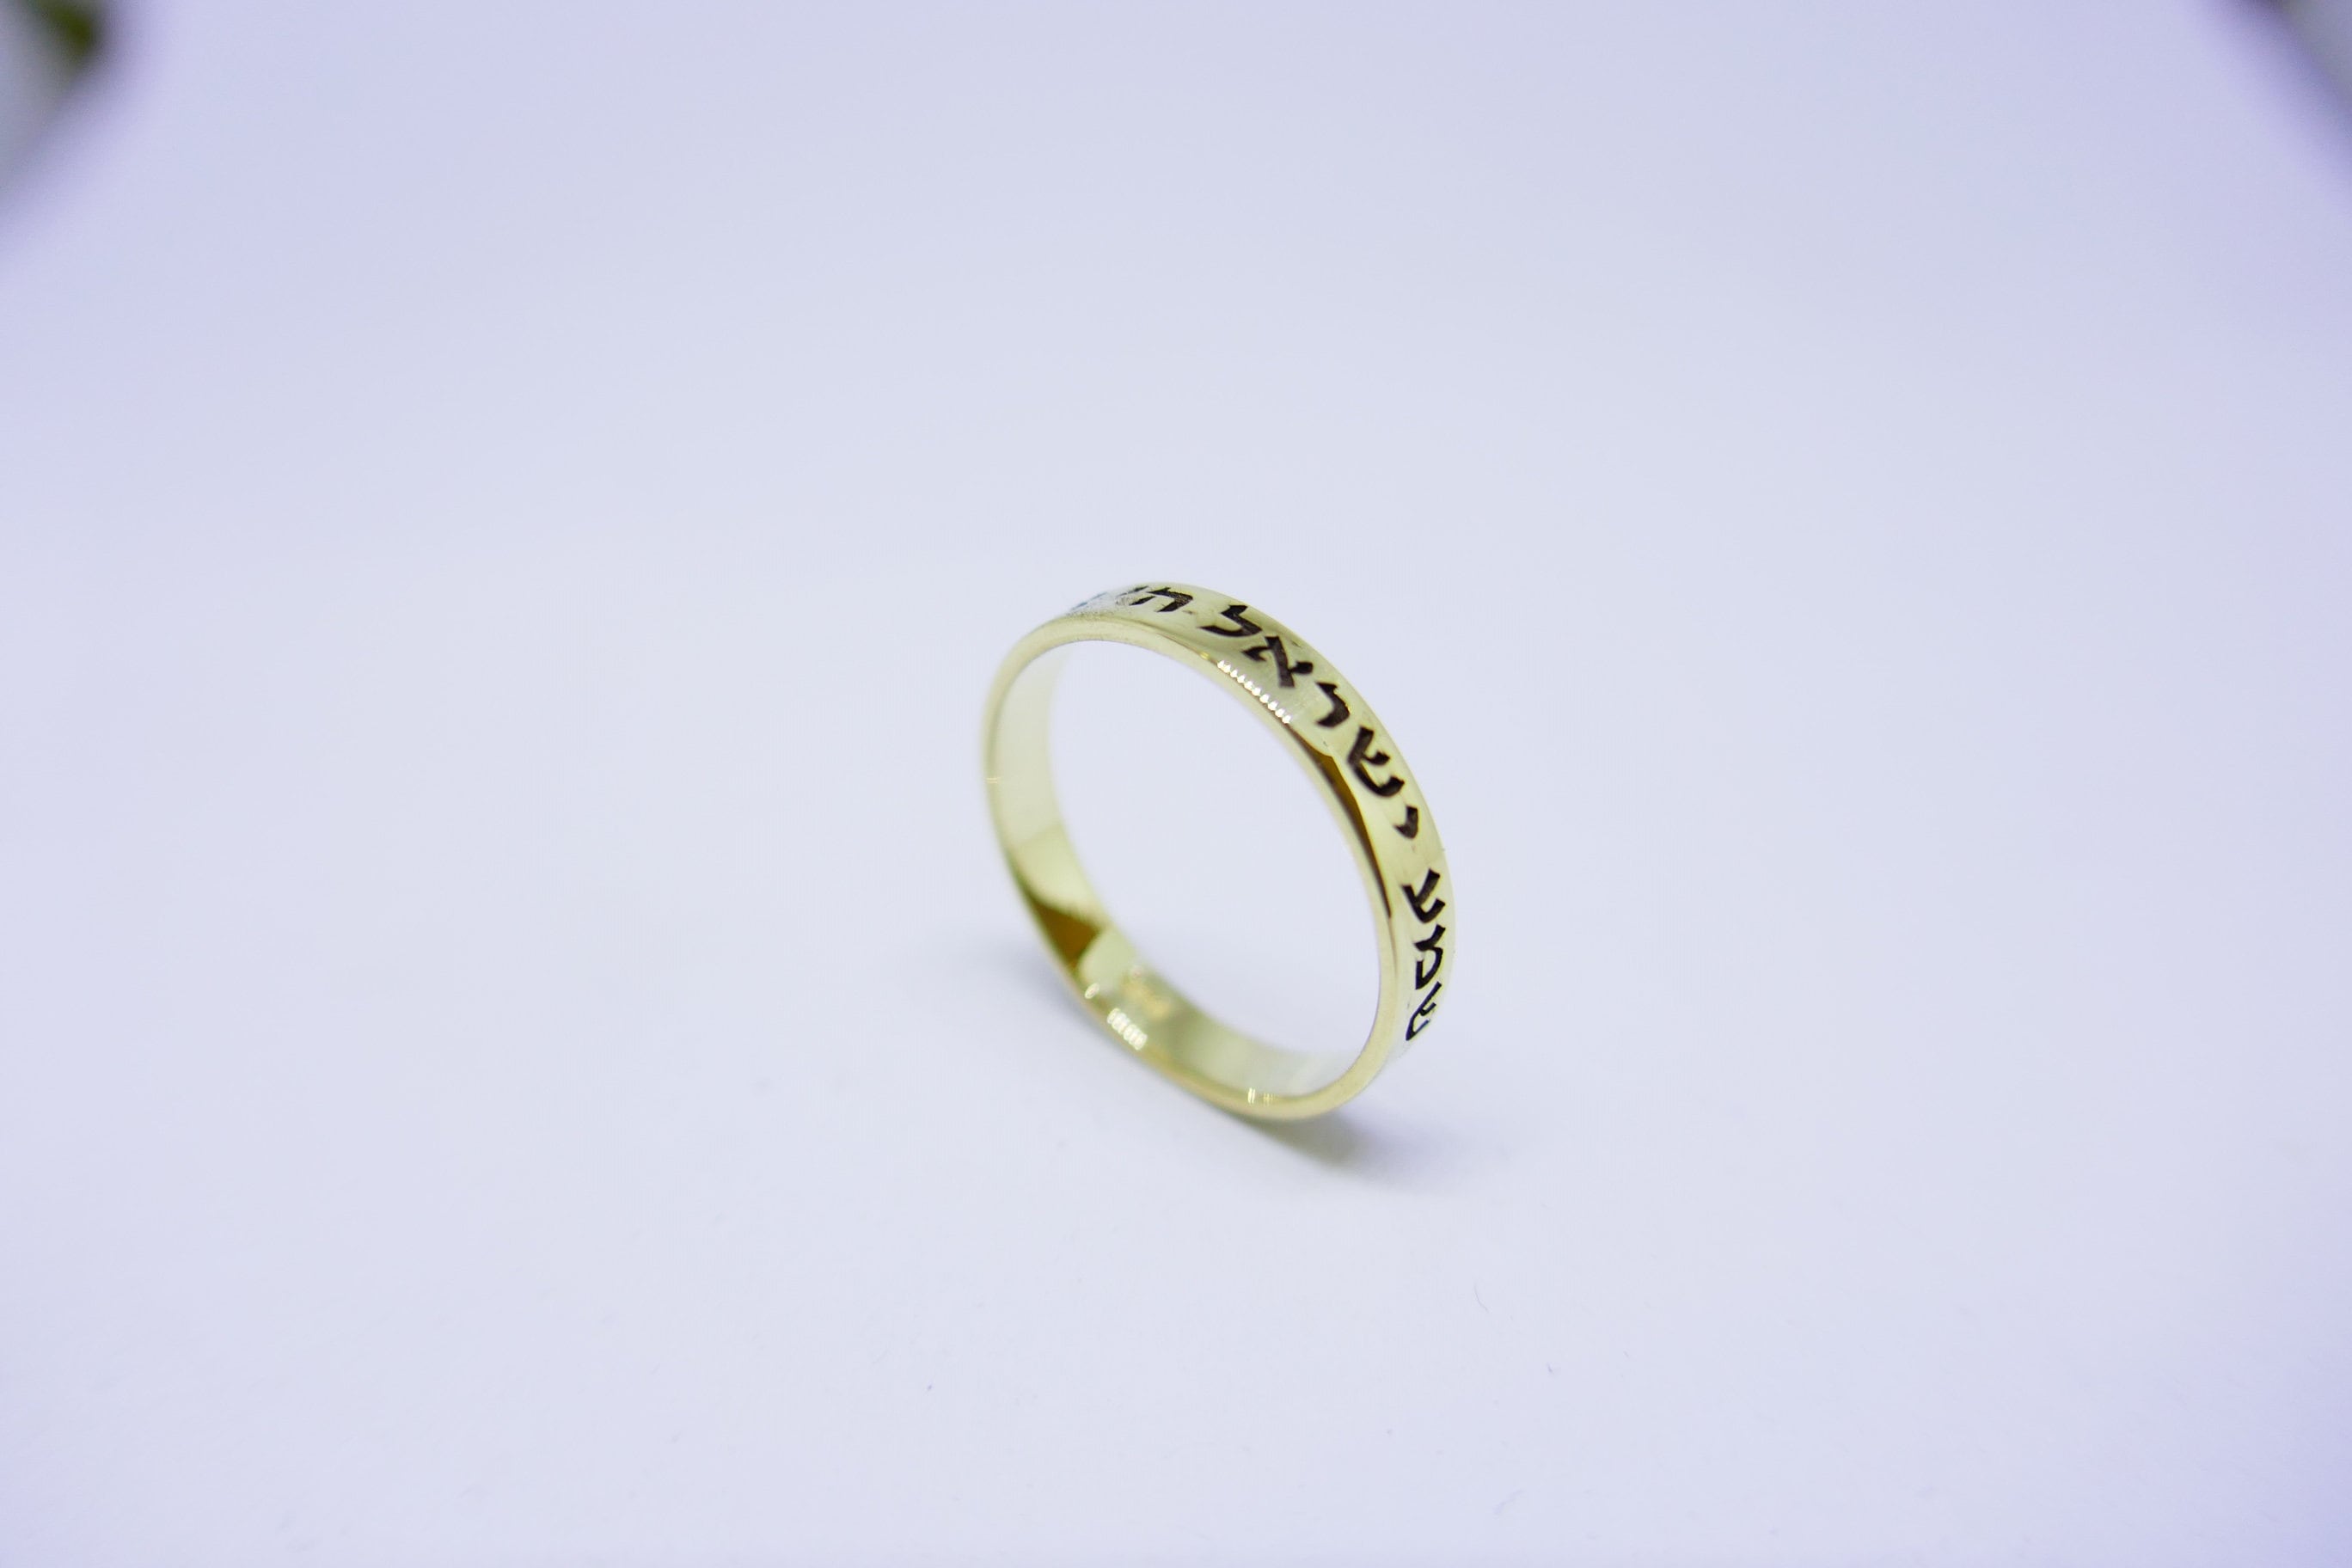 14K Yellow Gold & Shema Israel Ring - Spiritual Hebrew/Jewish Jewelry - Perfect Gift for Her - Personalized Bridesmaid Gift - Thin Design